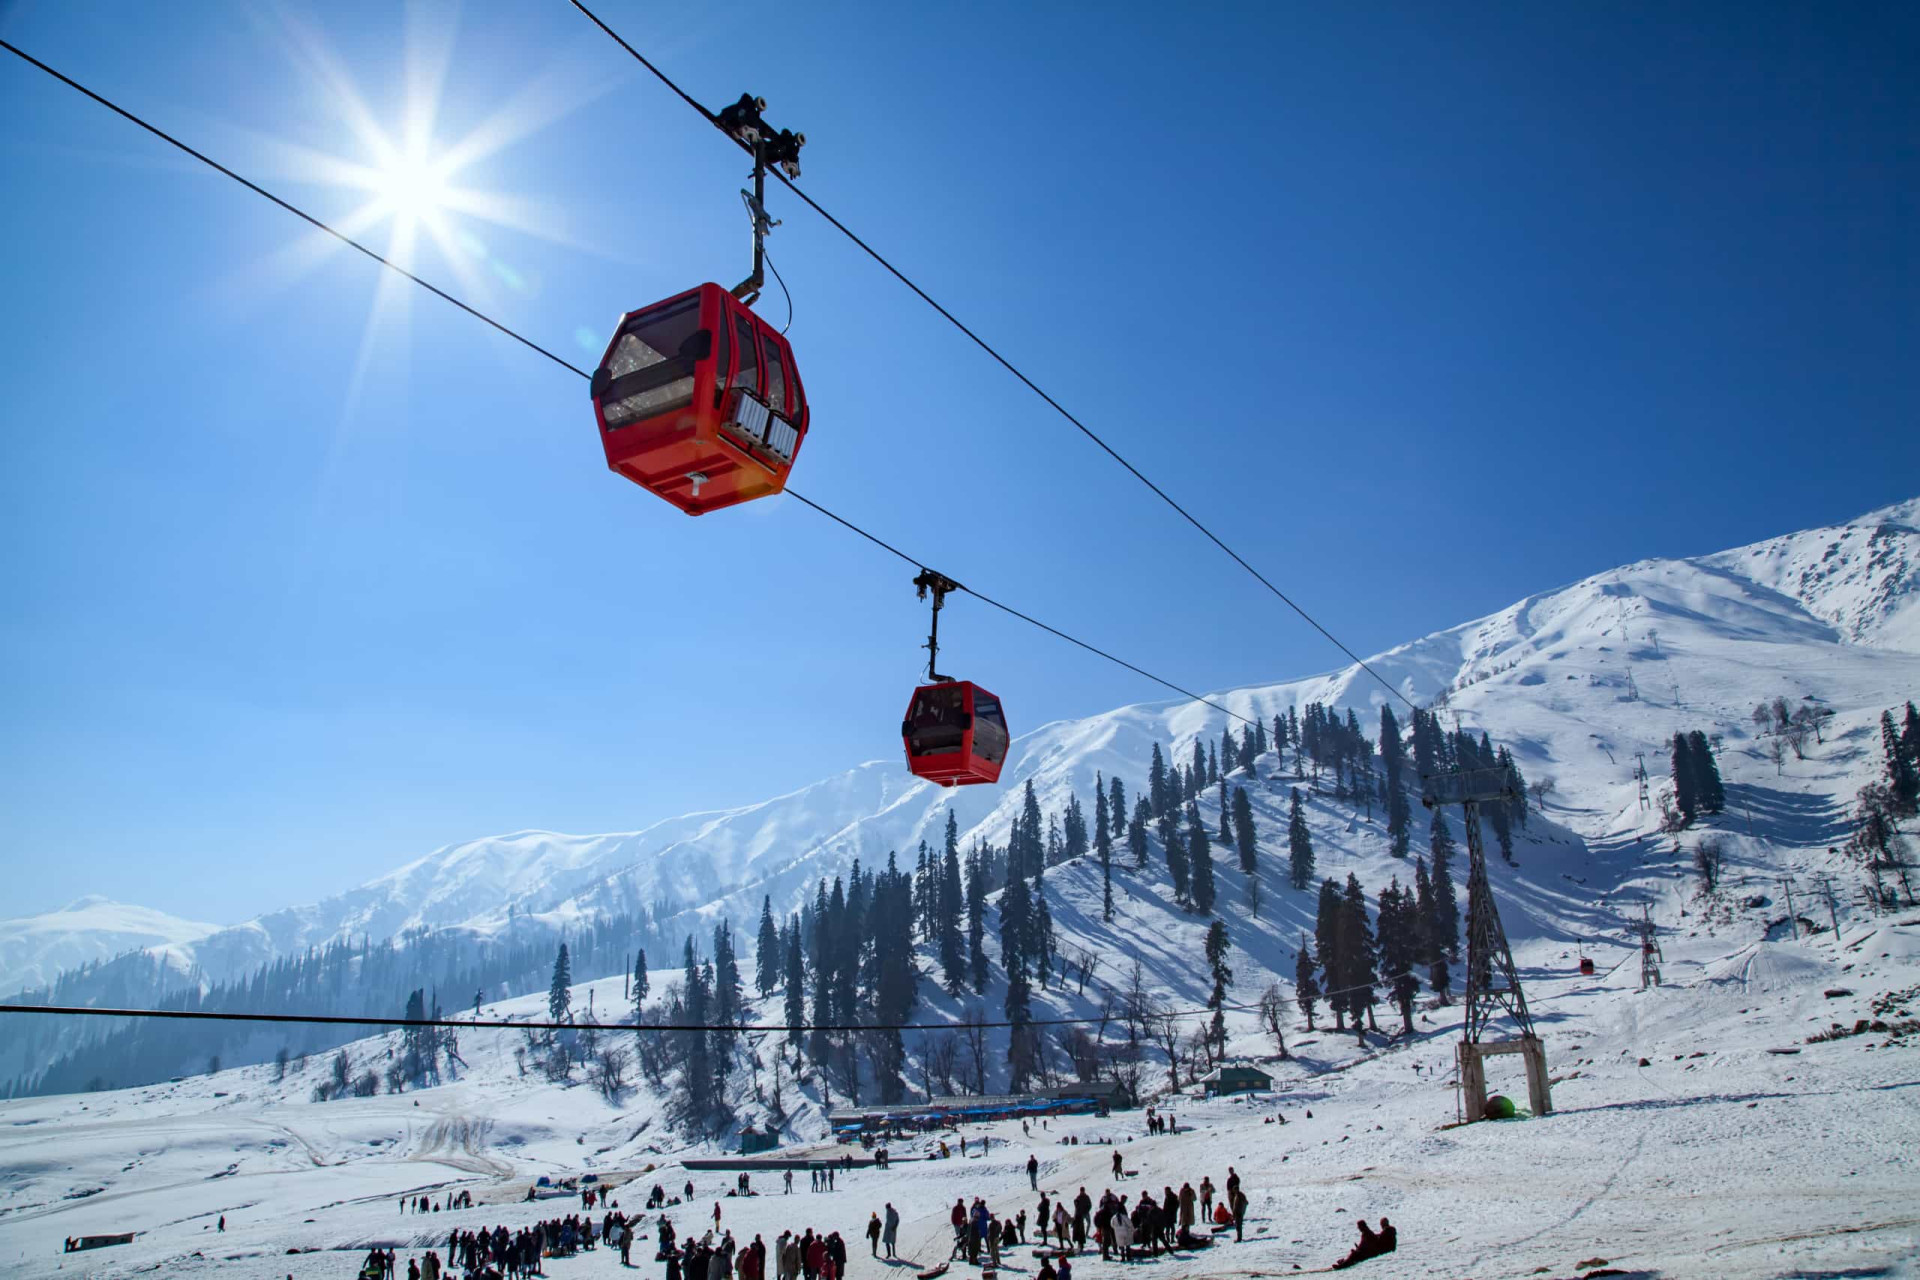 <p>Gulmarg is located in the Baramulla district of Jammu state. Set in the beautiful Kashmir Valley, the hill station marks one of the region's best skiing spots. It's also a convenient base for treks to the <a href="https://www.starsinsider.com/travel/160548/himalayas-the-worlds-most-beautiful-and-deadly-mountains" rel="noopener">Himalayas</a>. Visit between May and September and you can even practice your swing on an 18-hole golf course, one of the highest layouts in the world!</p>